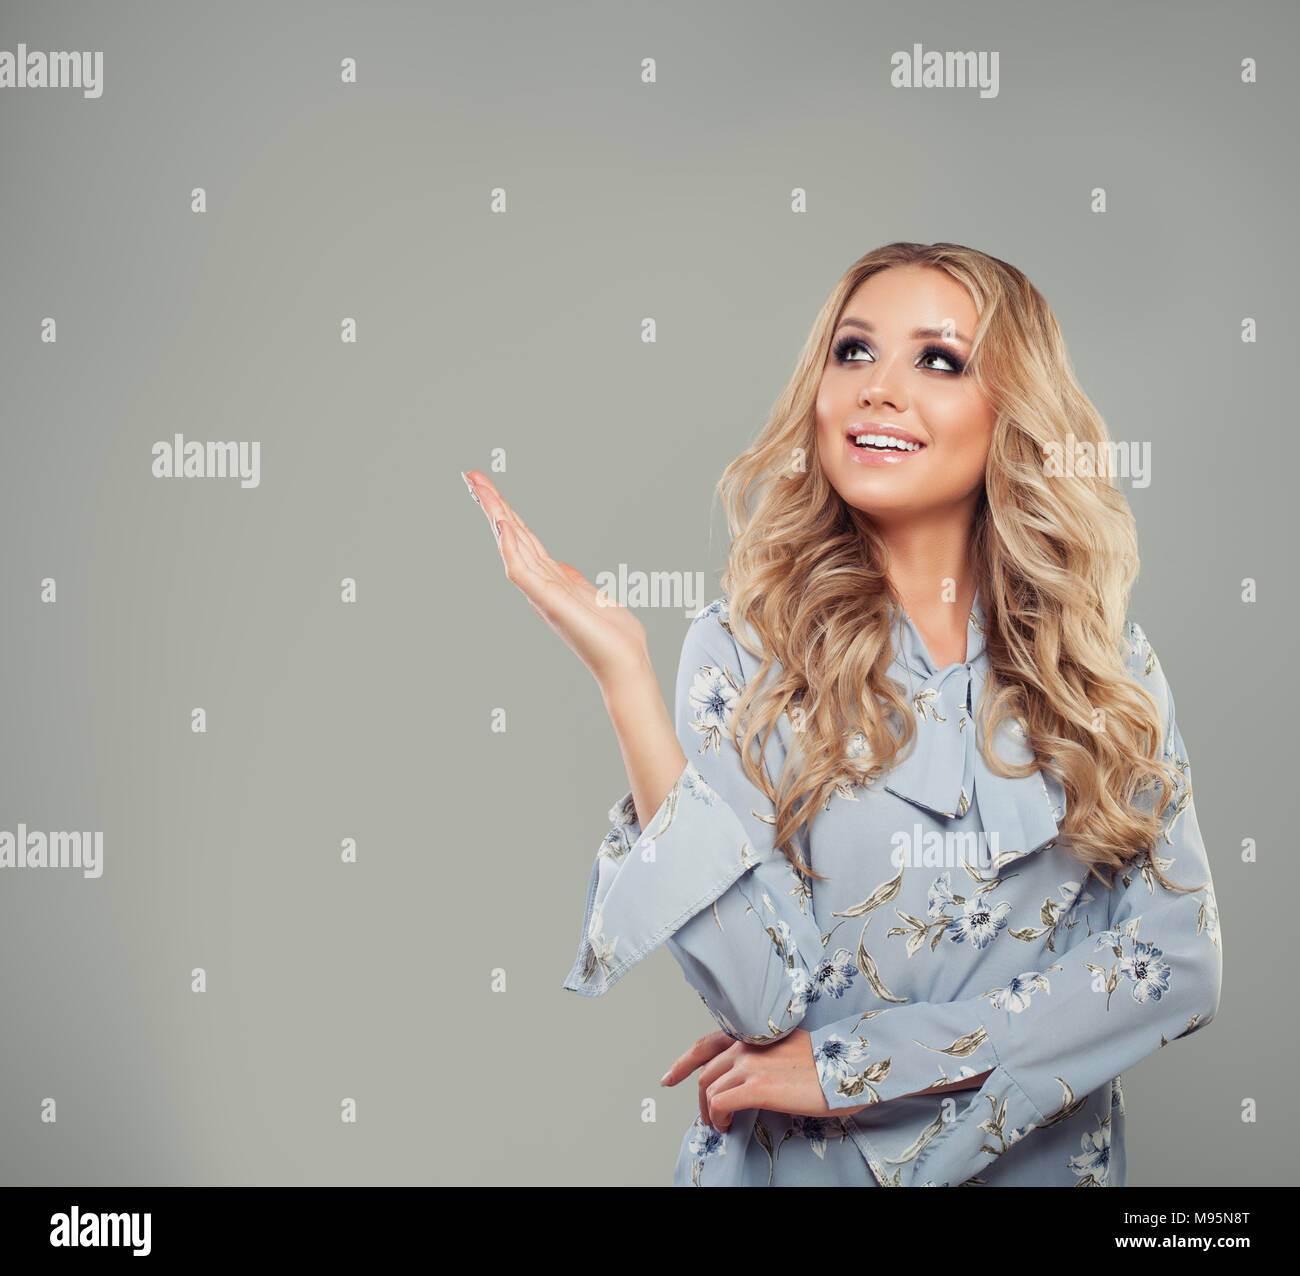 Cute Woman Fashion Model Pointing her Hand on Gray Background Stock Photo